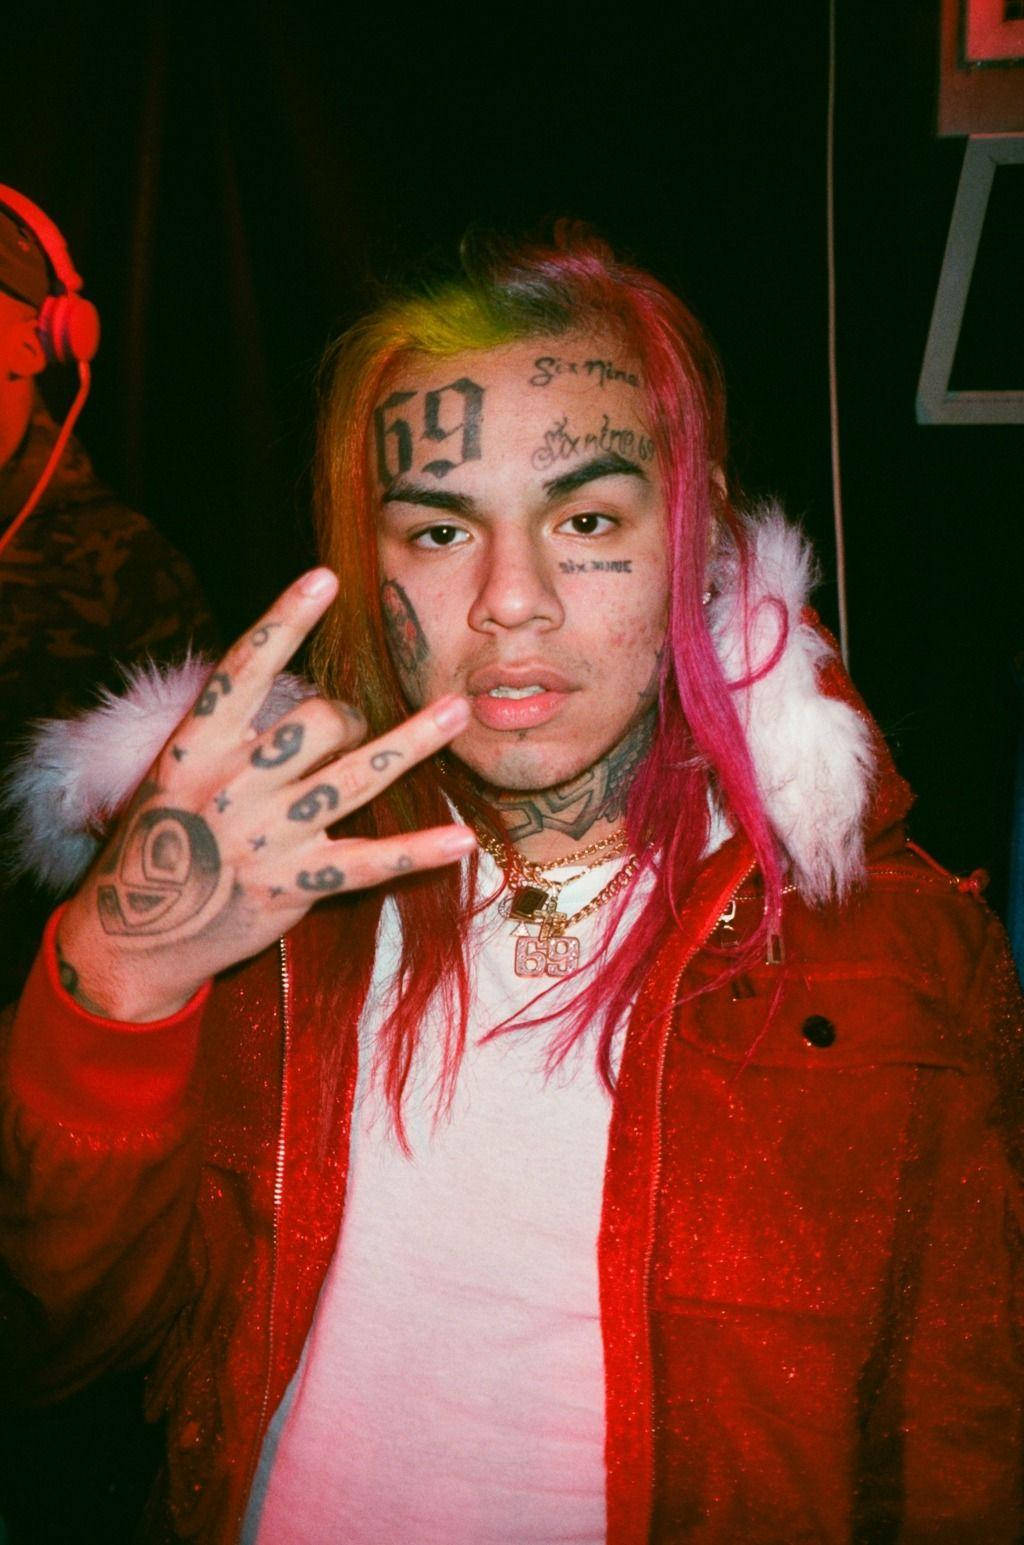 6ix9ine Red Outfit Wallpaper